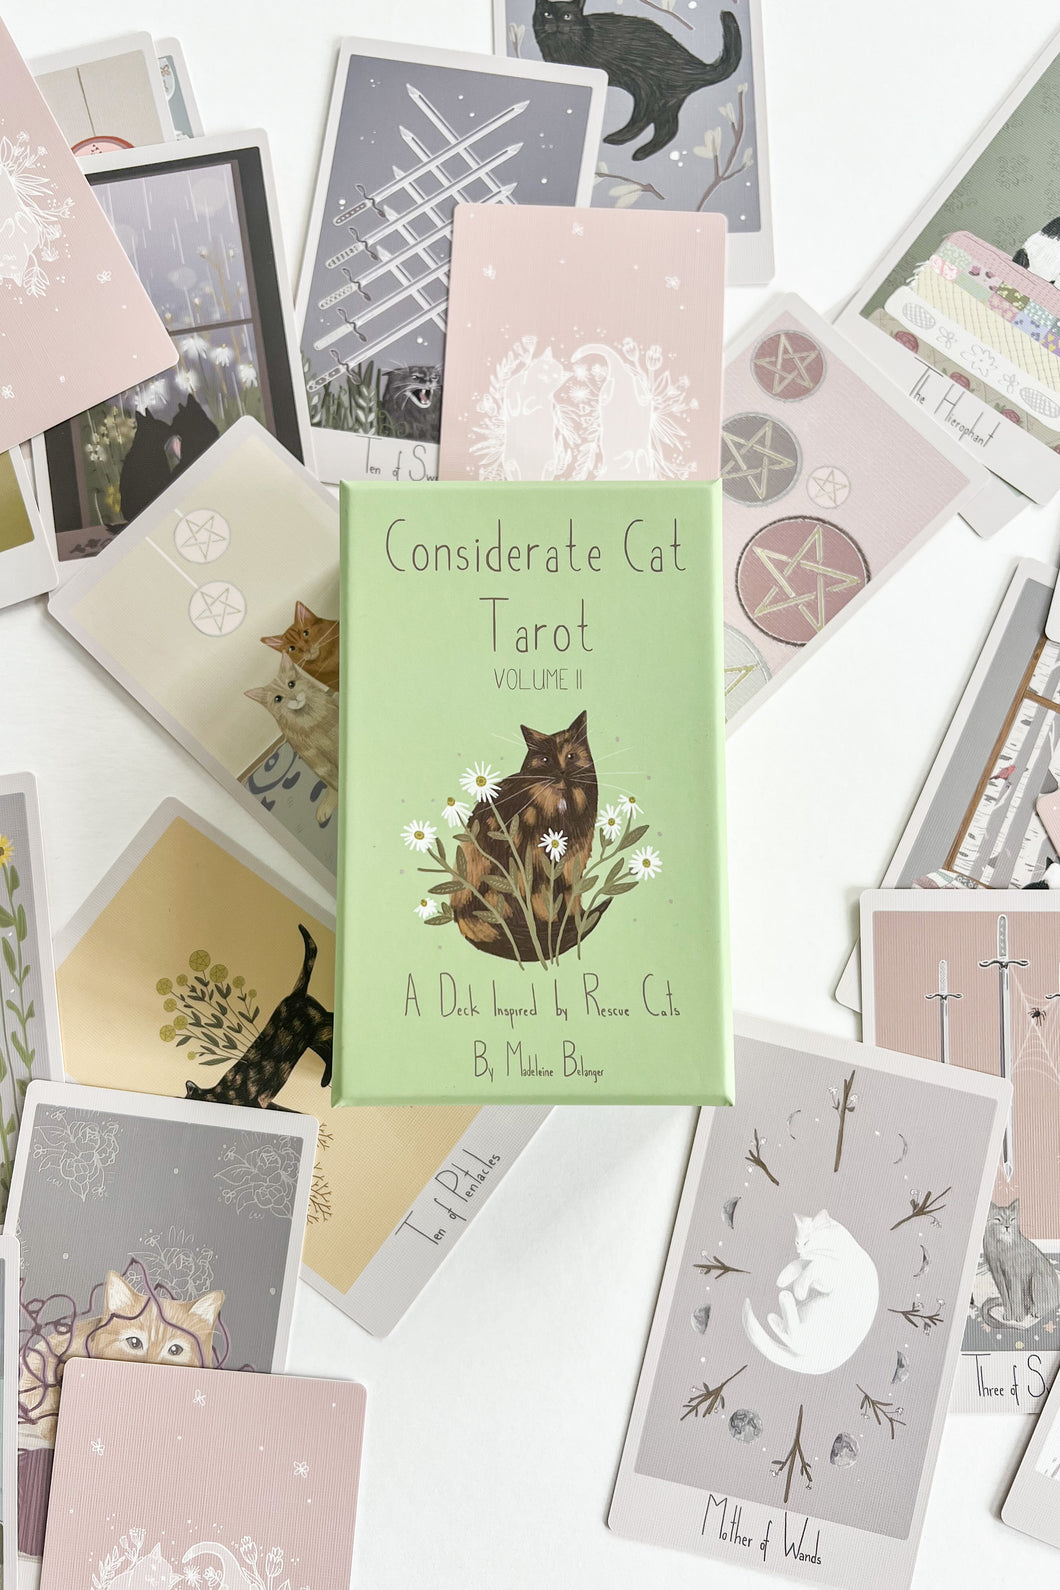 Tarot Deck inspired by rescue cat stories